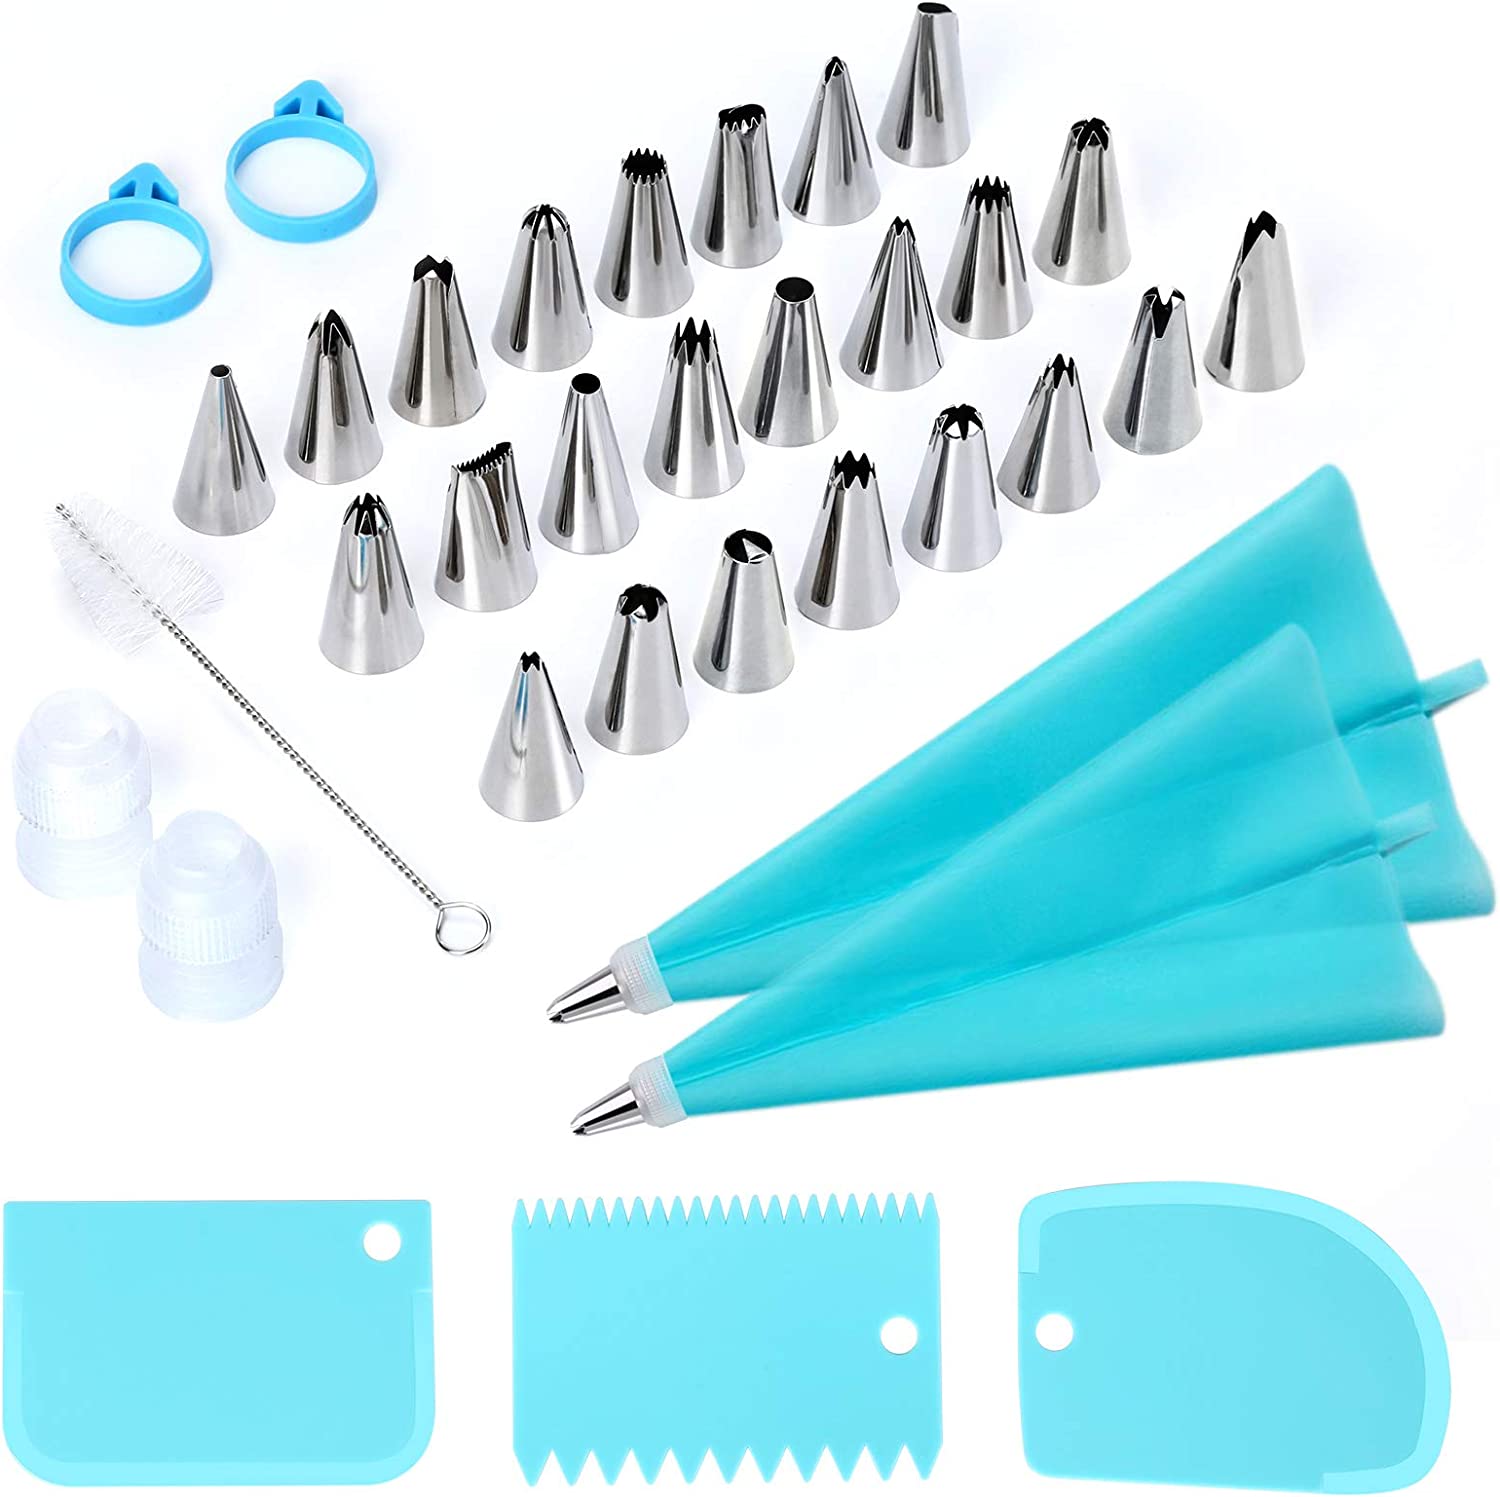 Kaverme Stainless Steel Icing Tips Cake Decorating Kit, 34-Piece